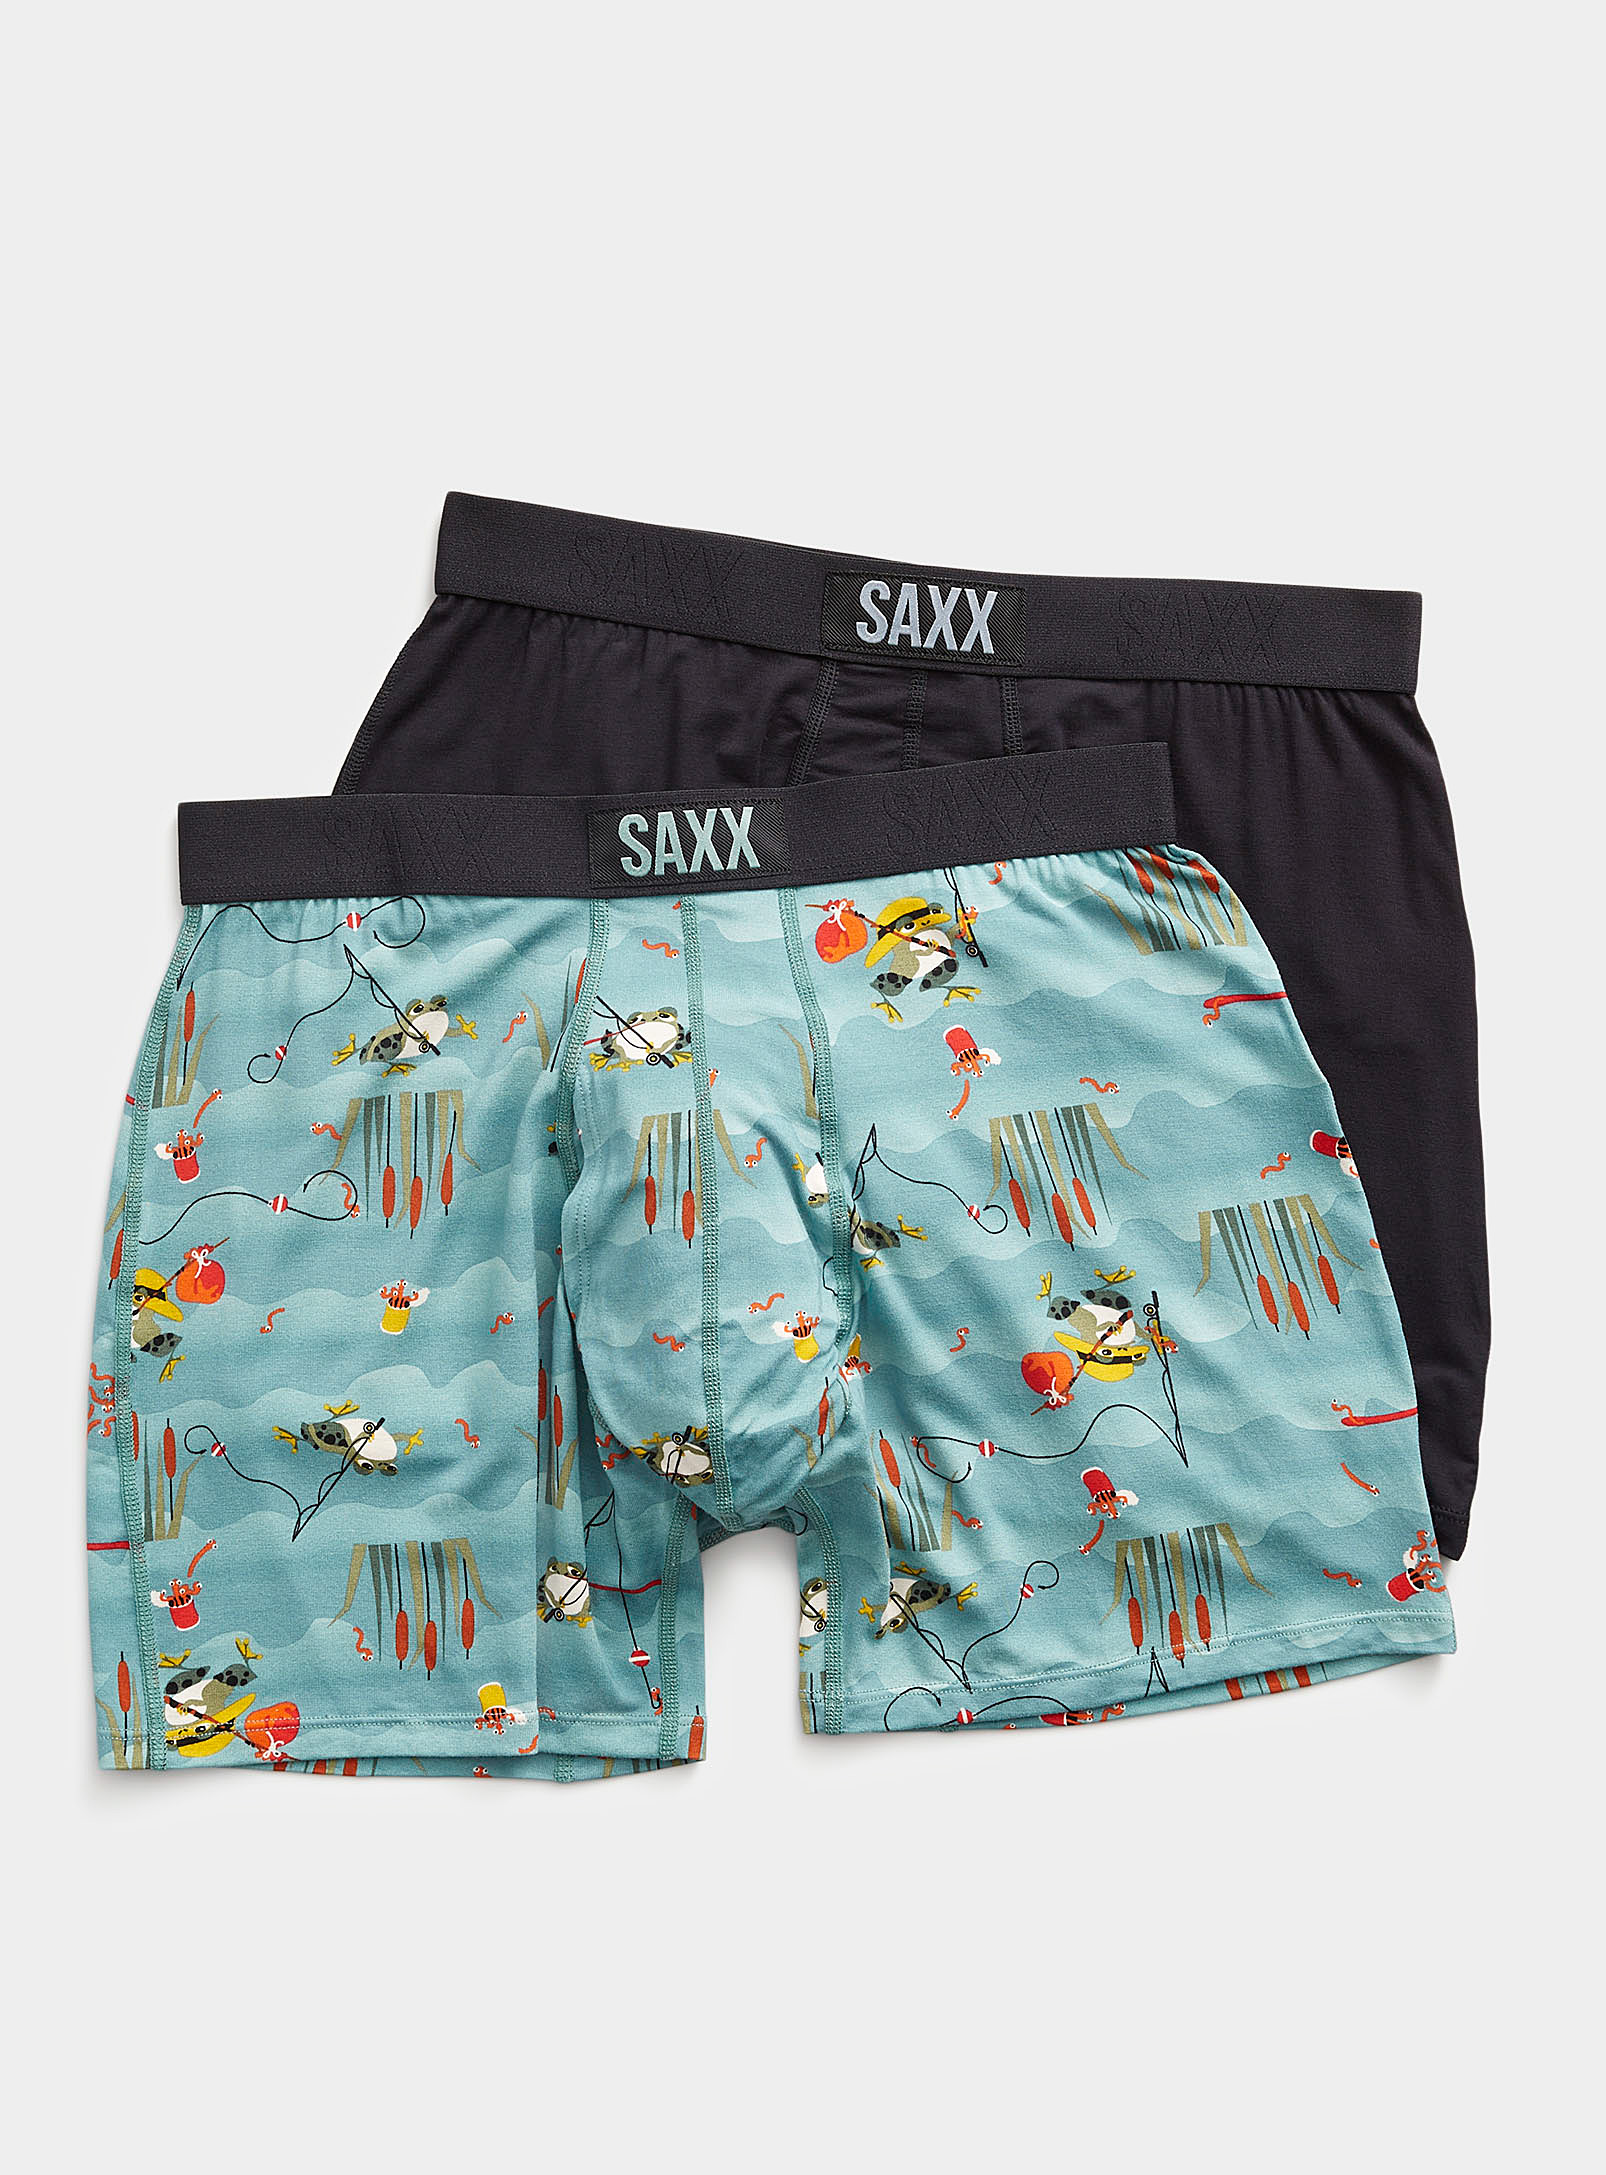 Saxx - Men's Gone Fishing boxer brief ULTRA 2-pack